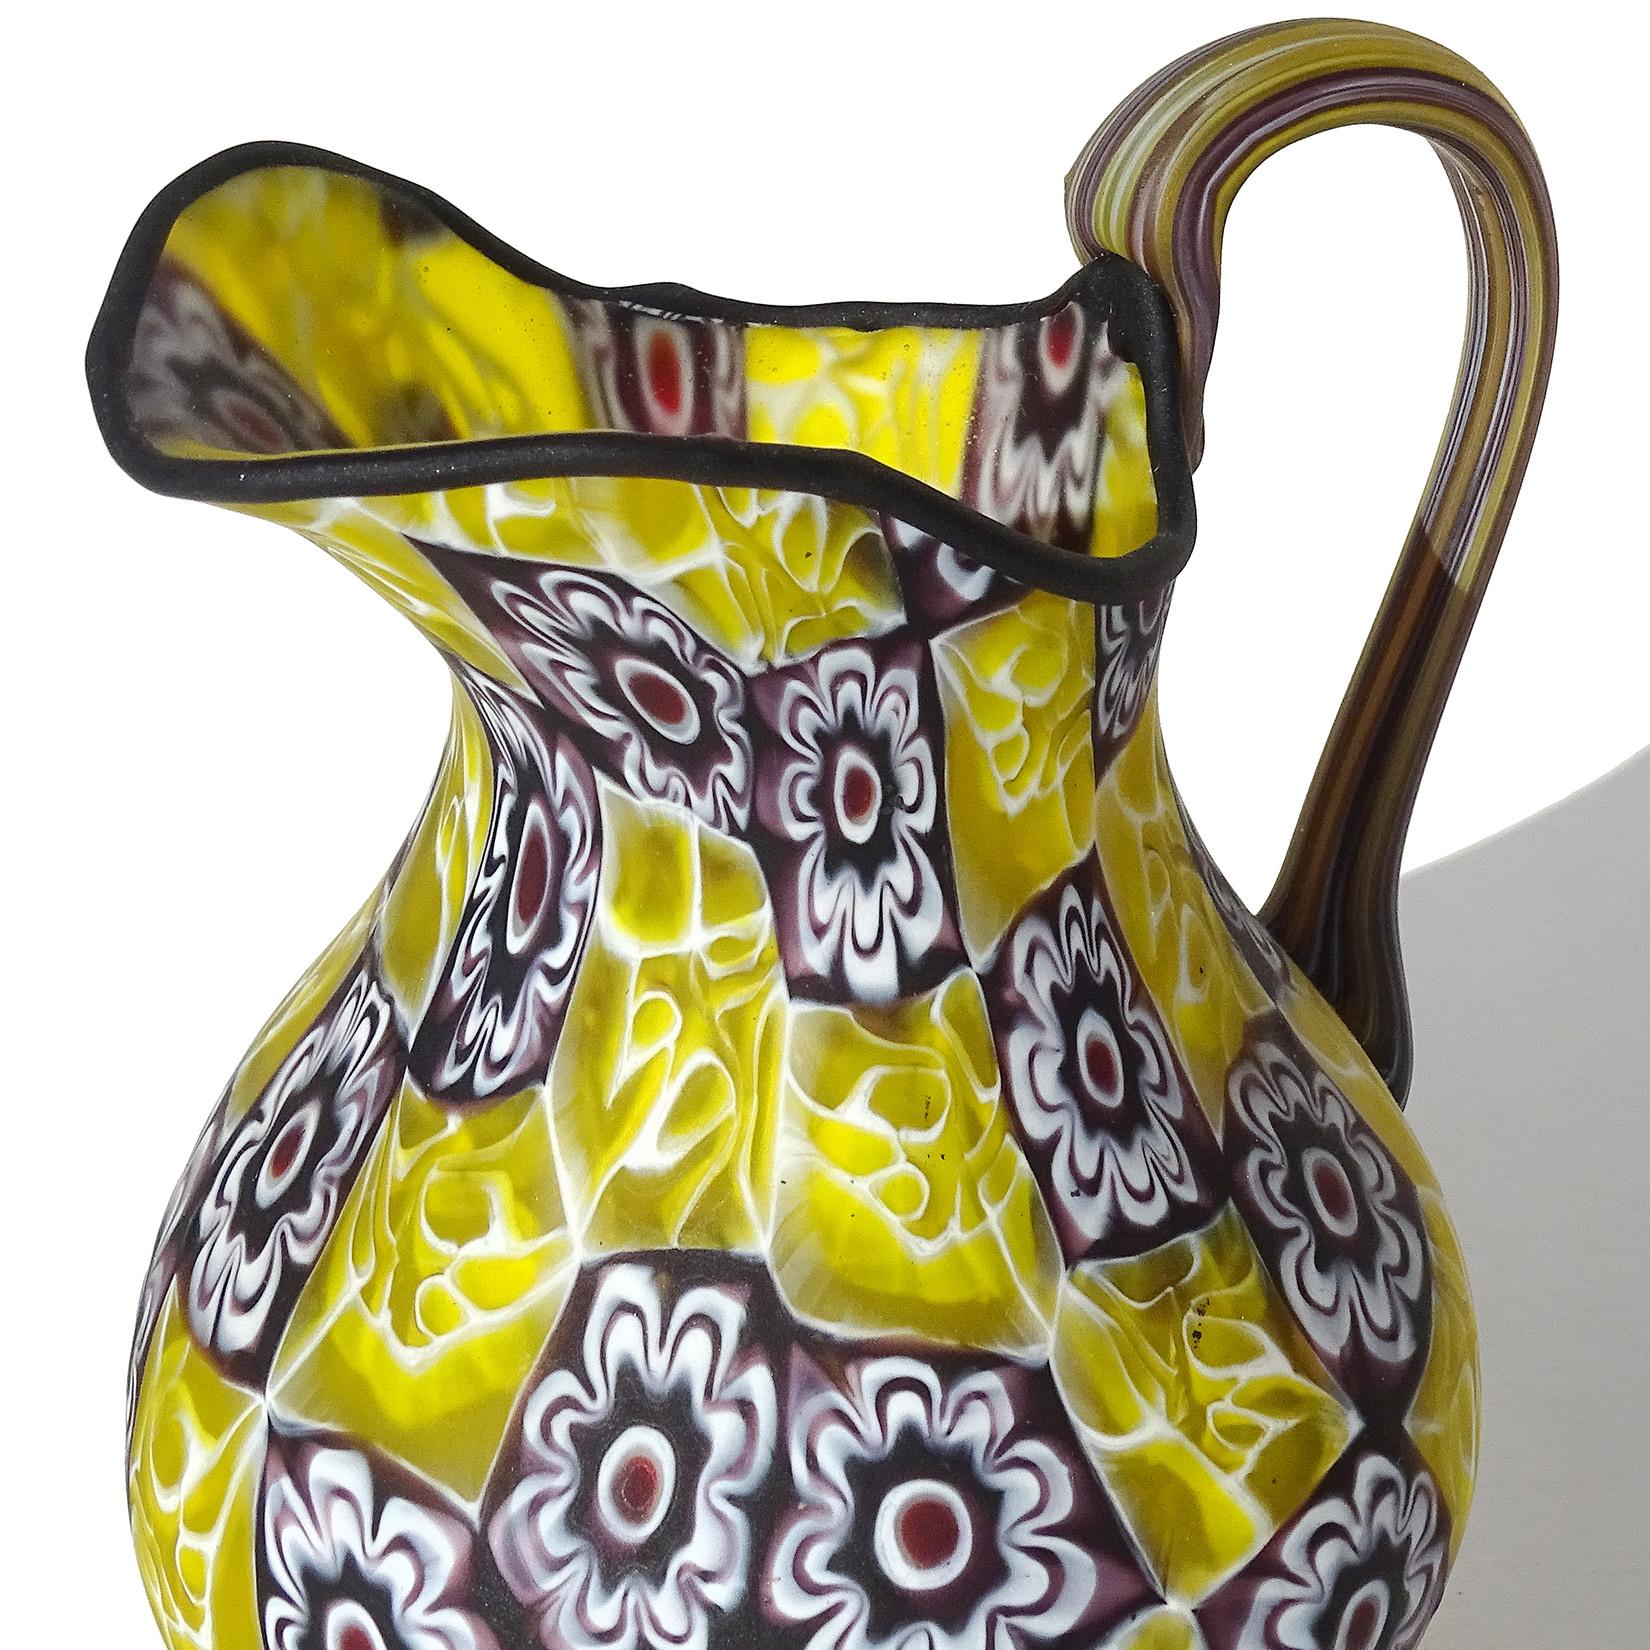 Fratelli Toso Murano Millefiori Mosaic Antique Italian Art Glass Pitcher Plate In Good Condition For Sale In Kissimmee, FL